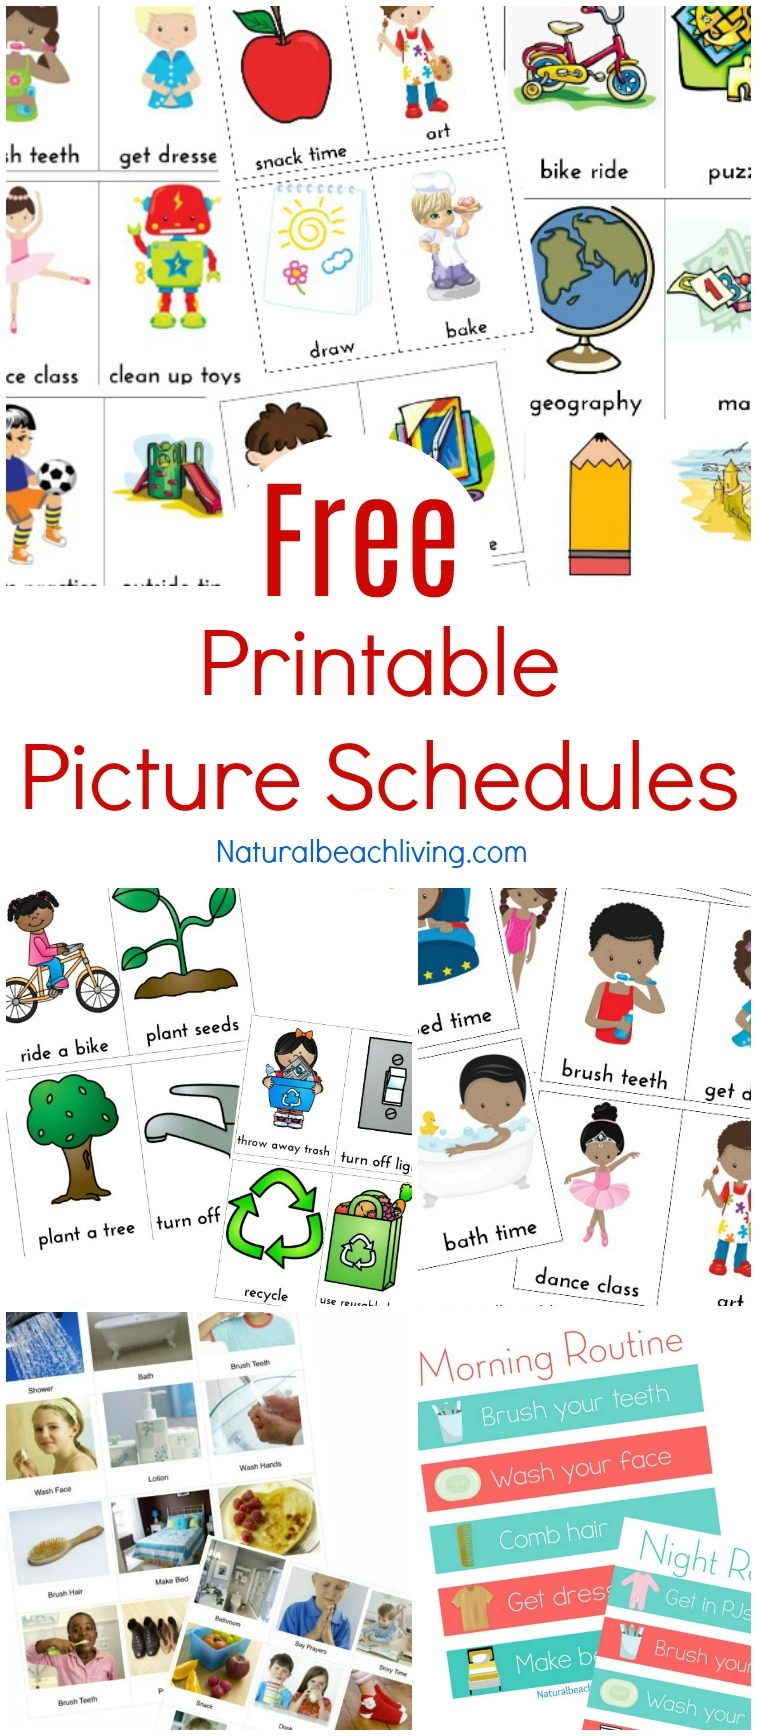 Free Printable Visual Schedule Pictures